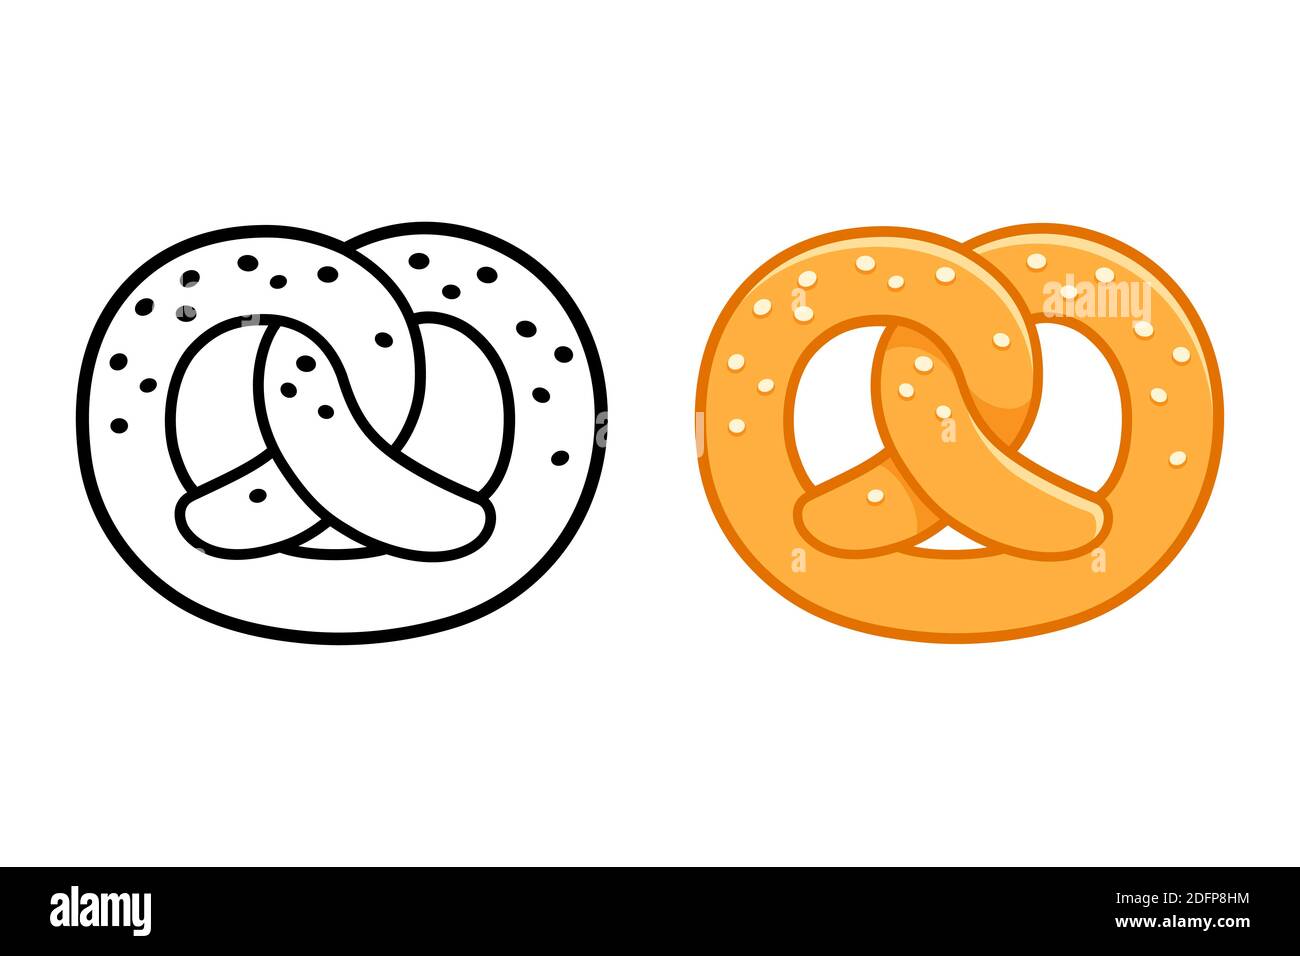 Soft pretzels, traditional German bakery snack. Black and while icon and color drawing. Isolated cartoon vector illustration. Stock Vector